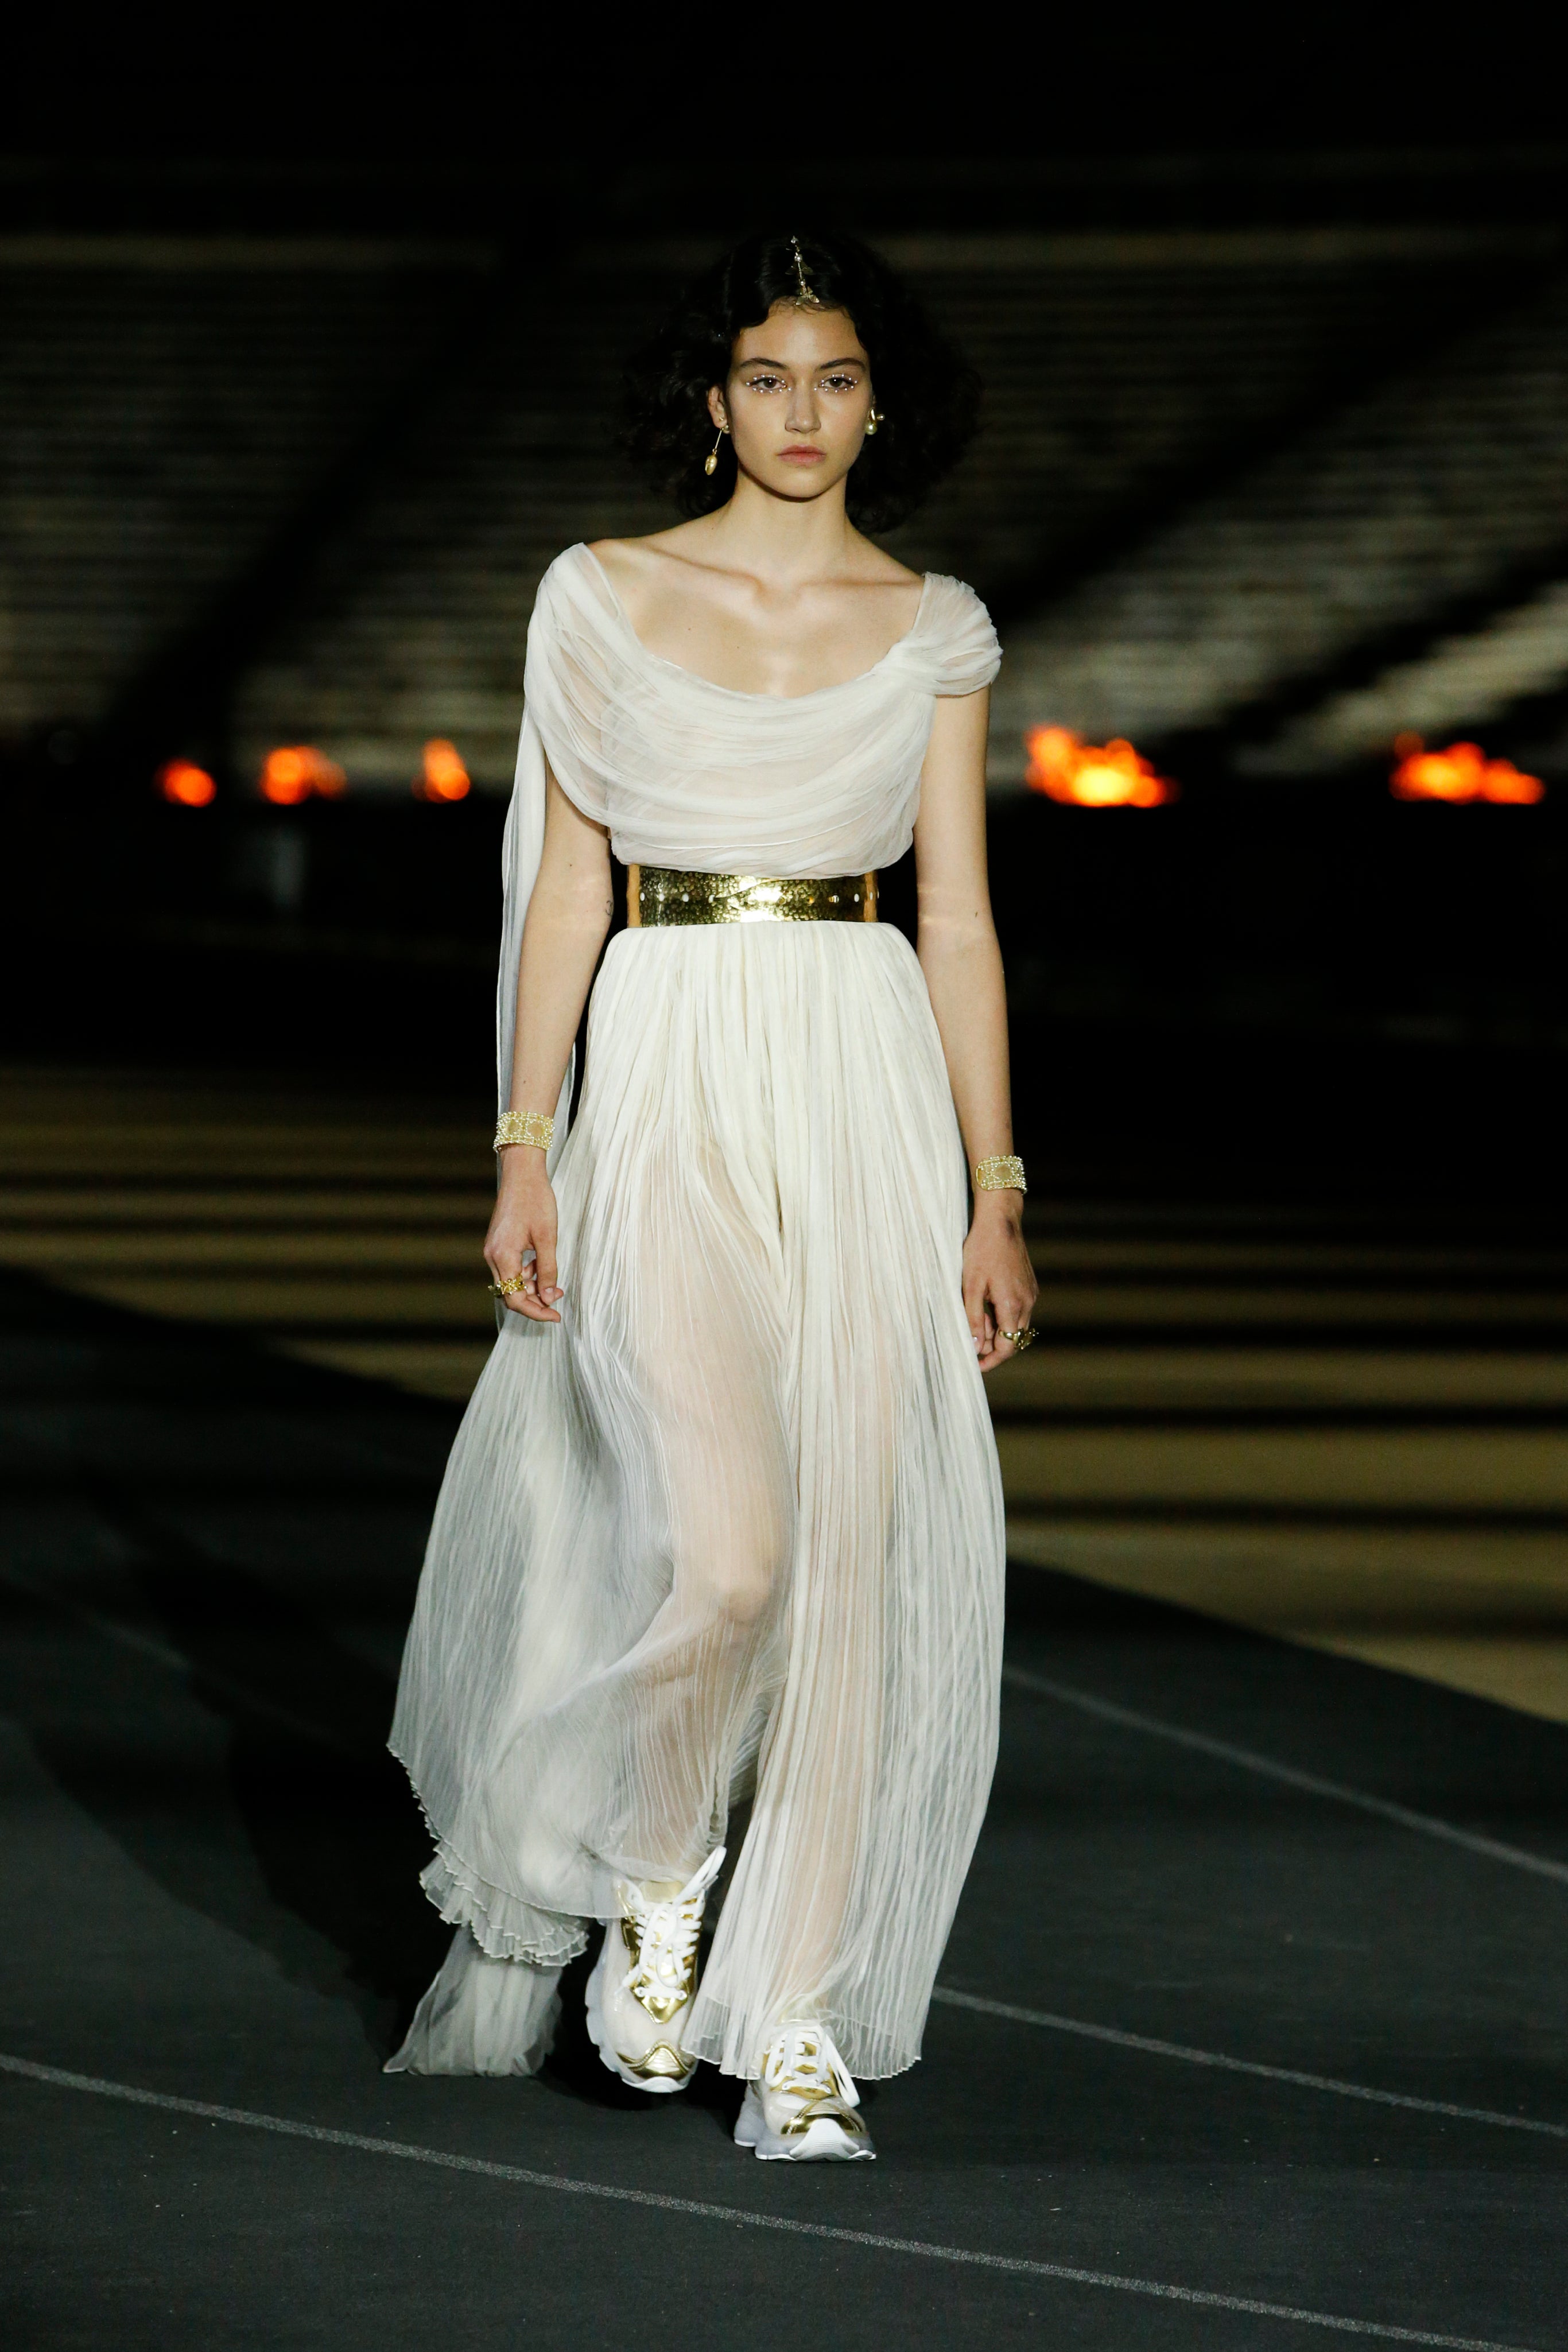 Dior stages cruise show at the Panathenaic Stadium in Athens